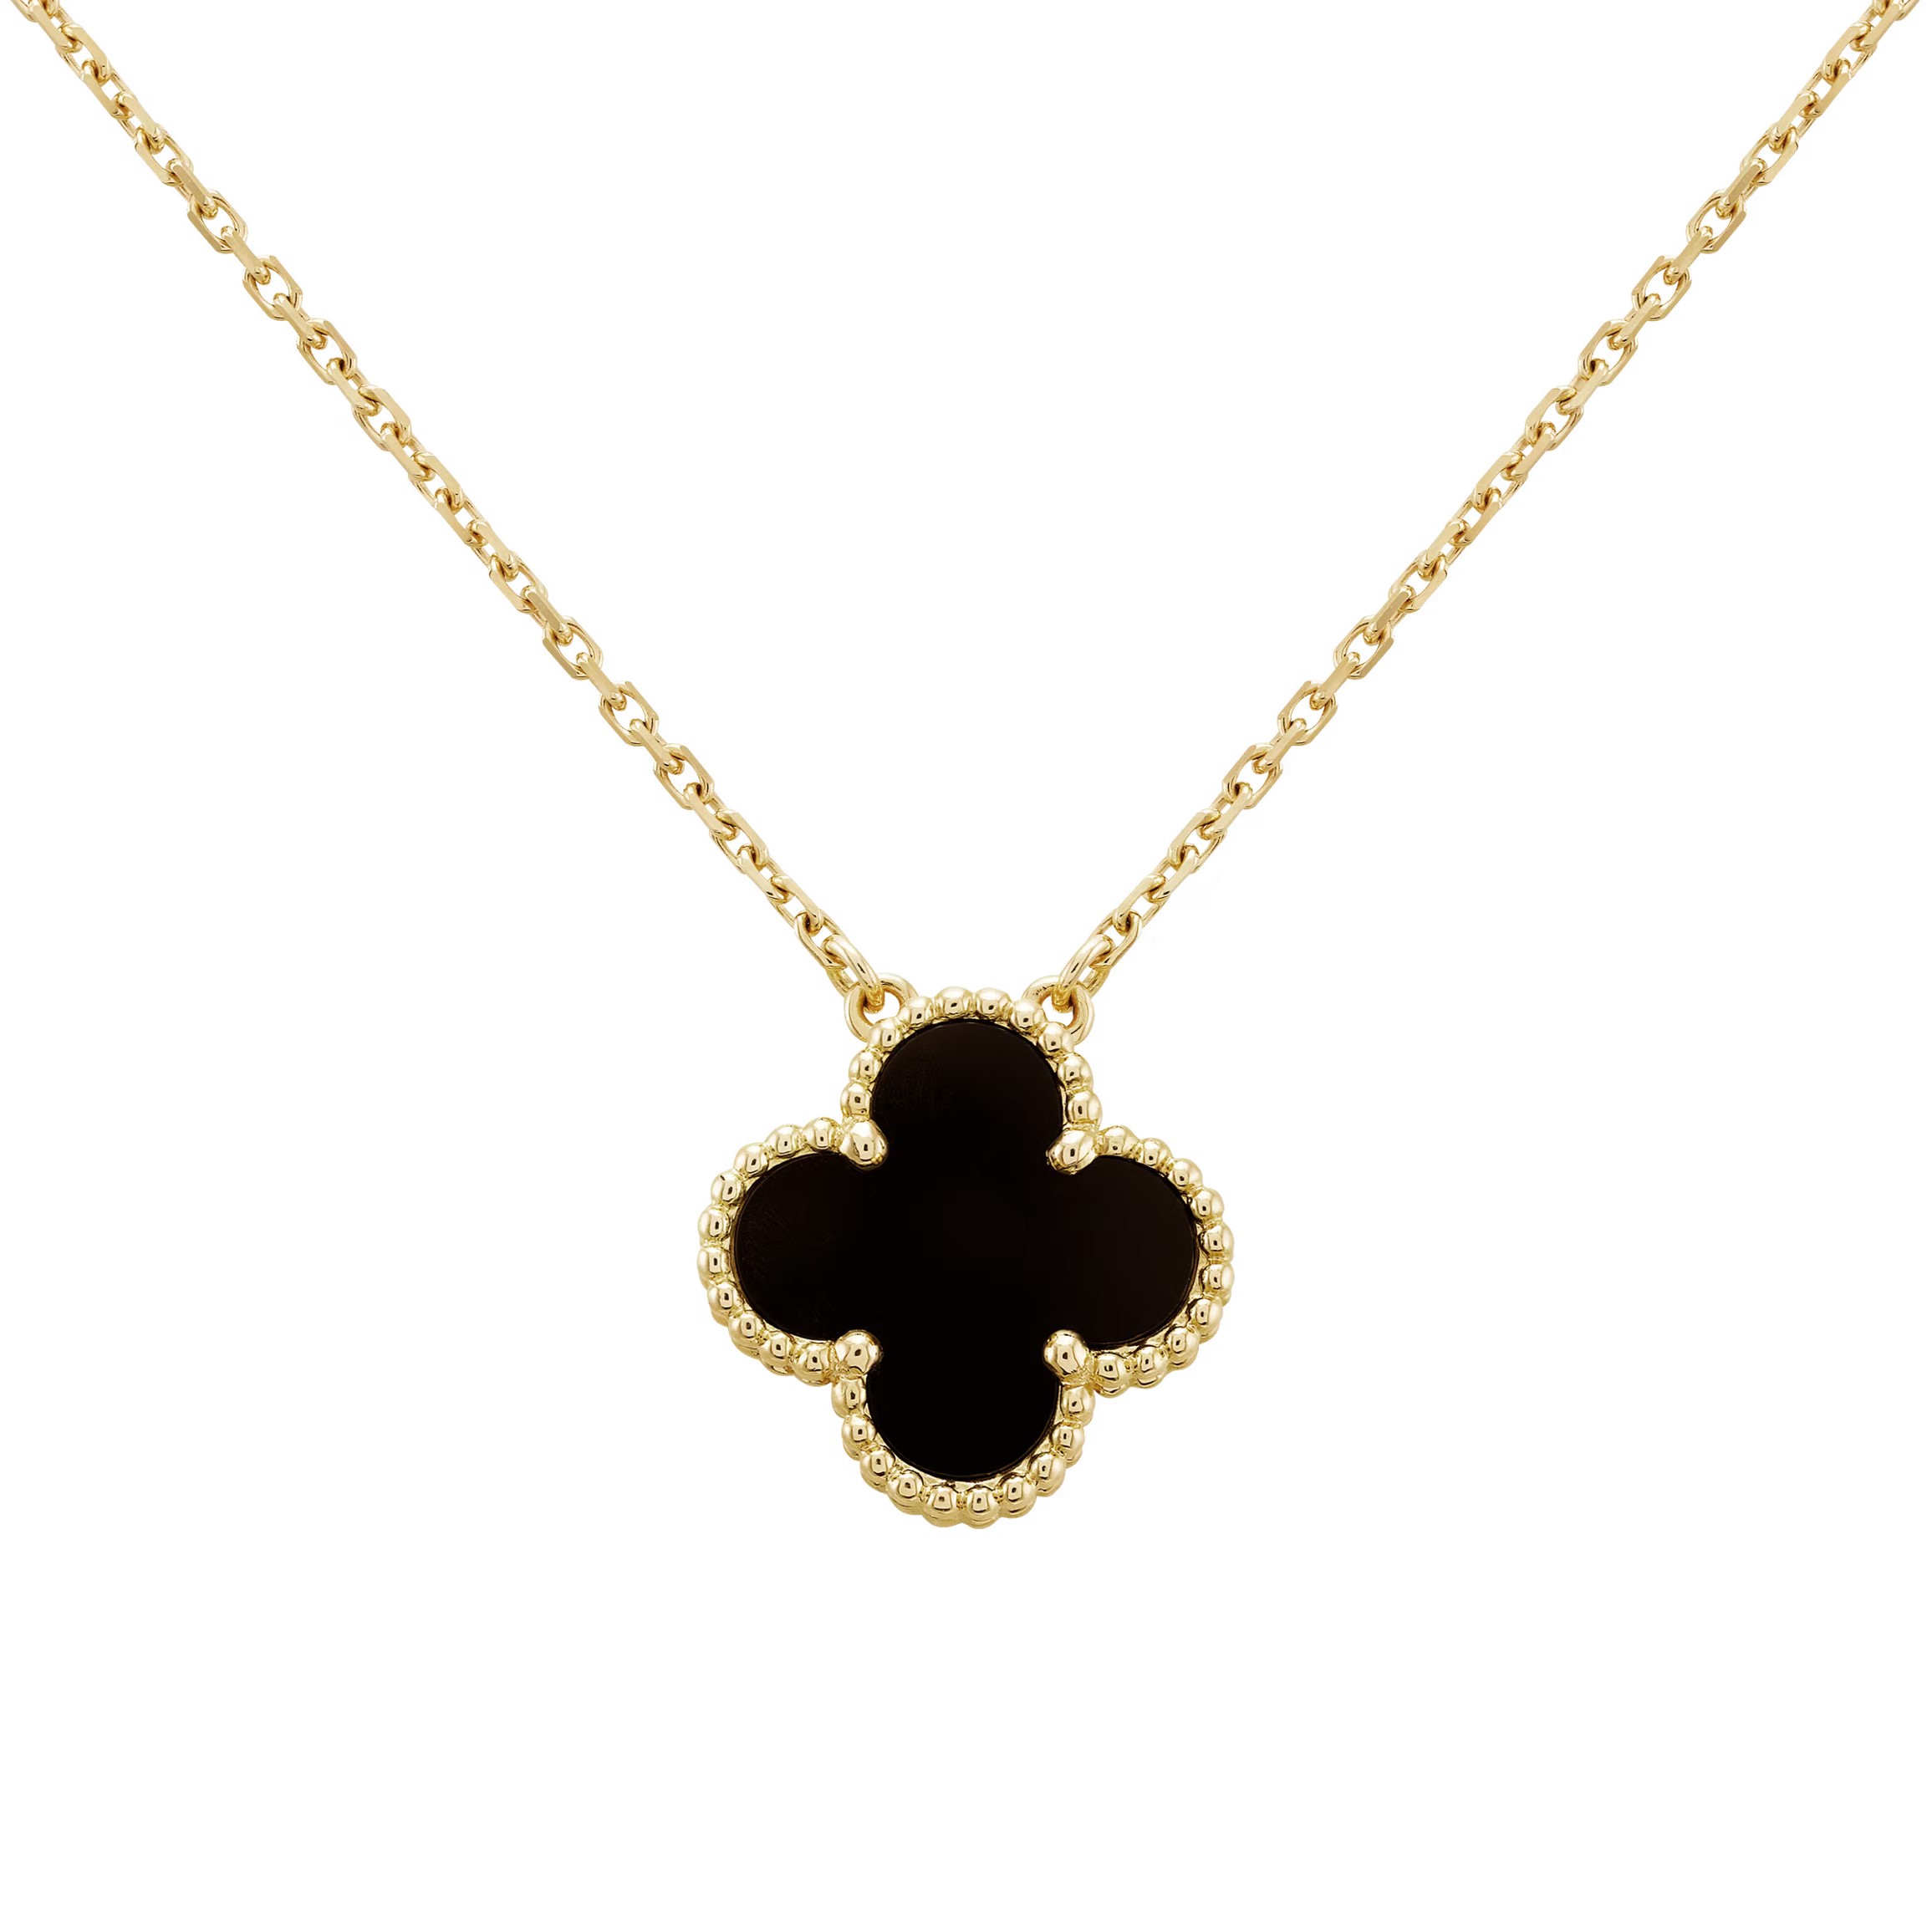 DÂY CHUYỀN VAN CLEEF & ARPELS VINTAGE ALHAMBRA NECKLACE PENDANT IN GOLD VCARA45800 5